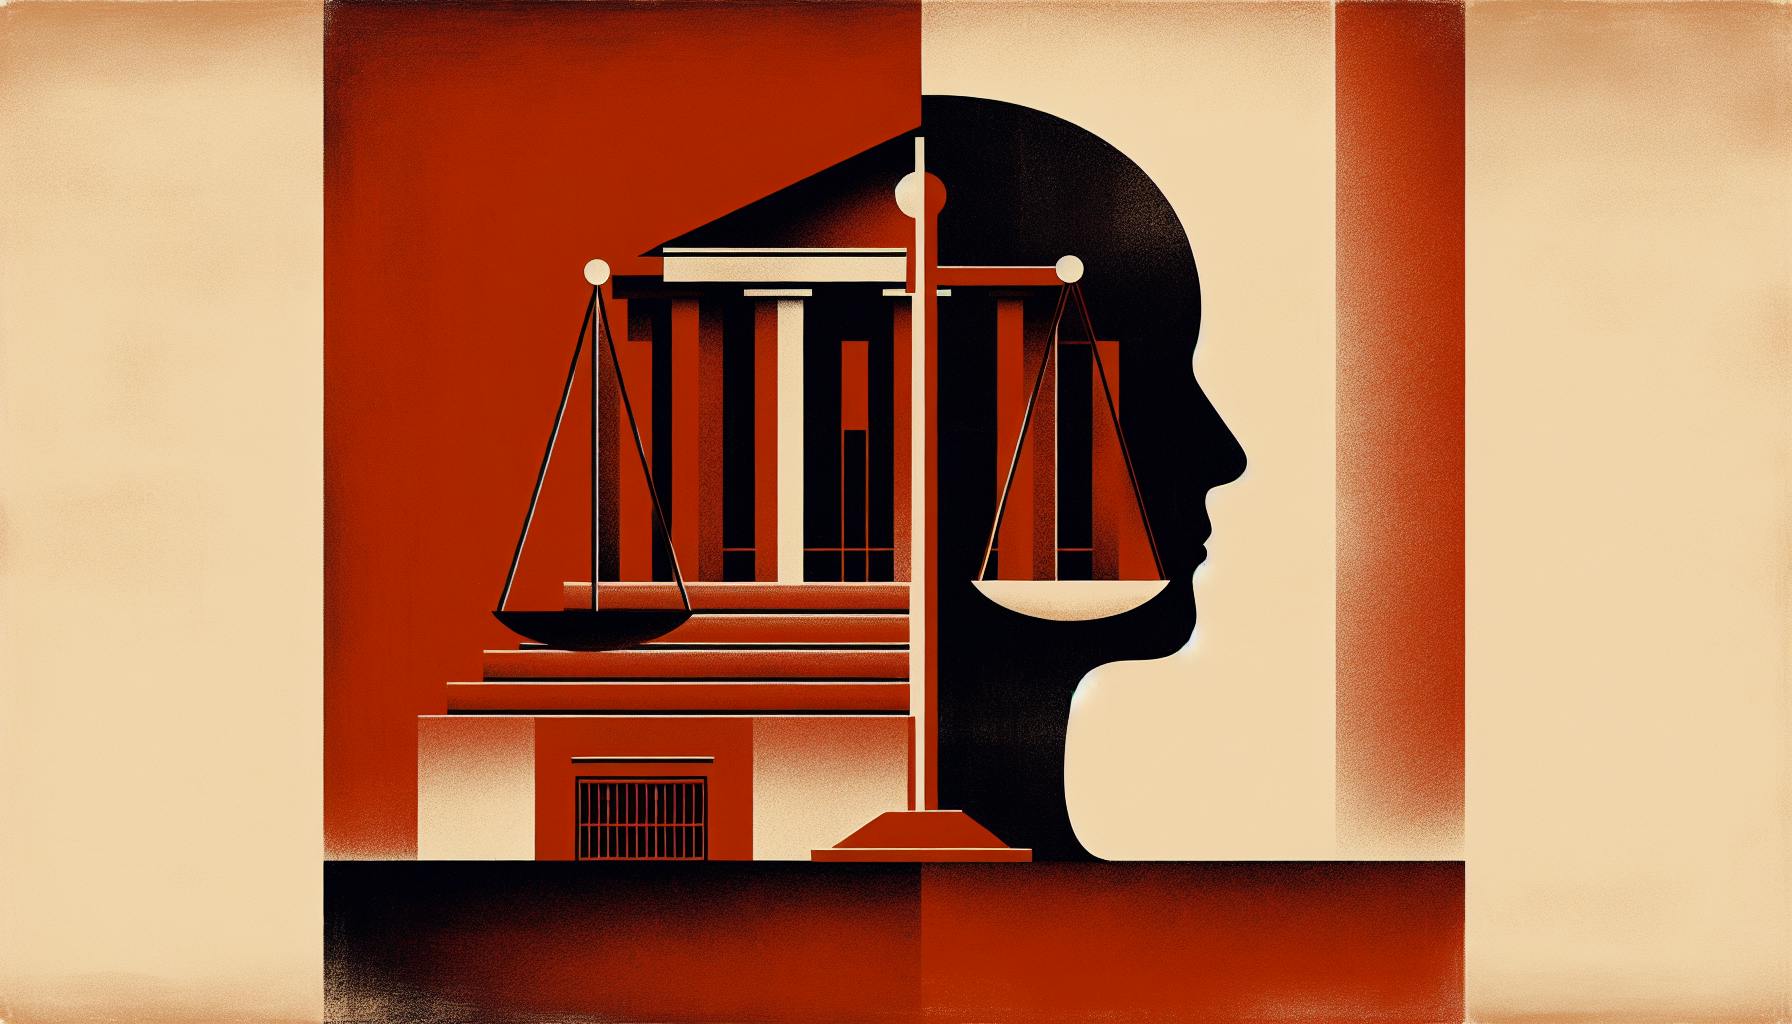 Subject Matter Jurisdiction vs Personal Jurisdiction: Scope and Power of Courts